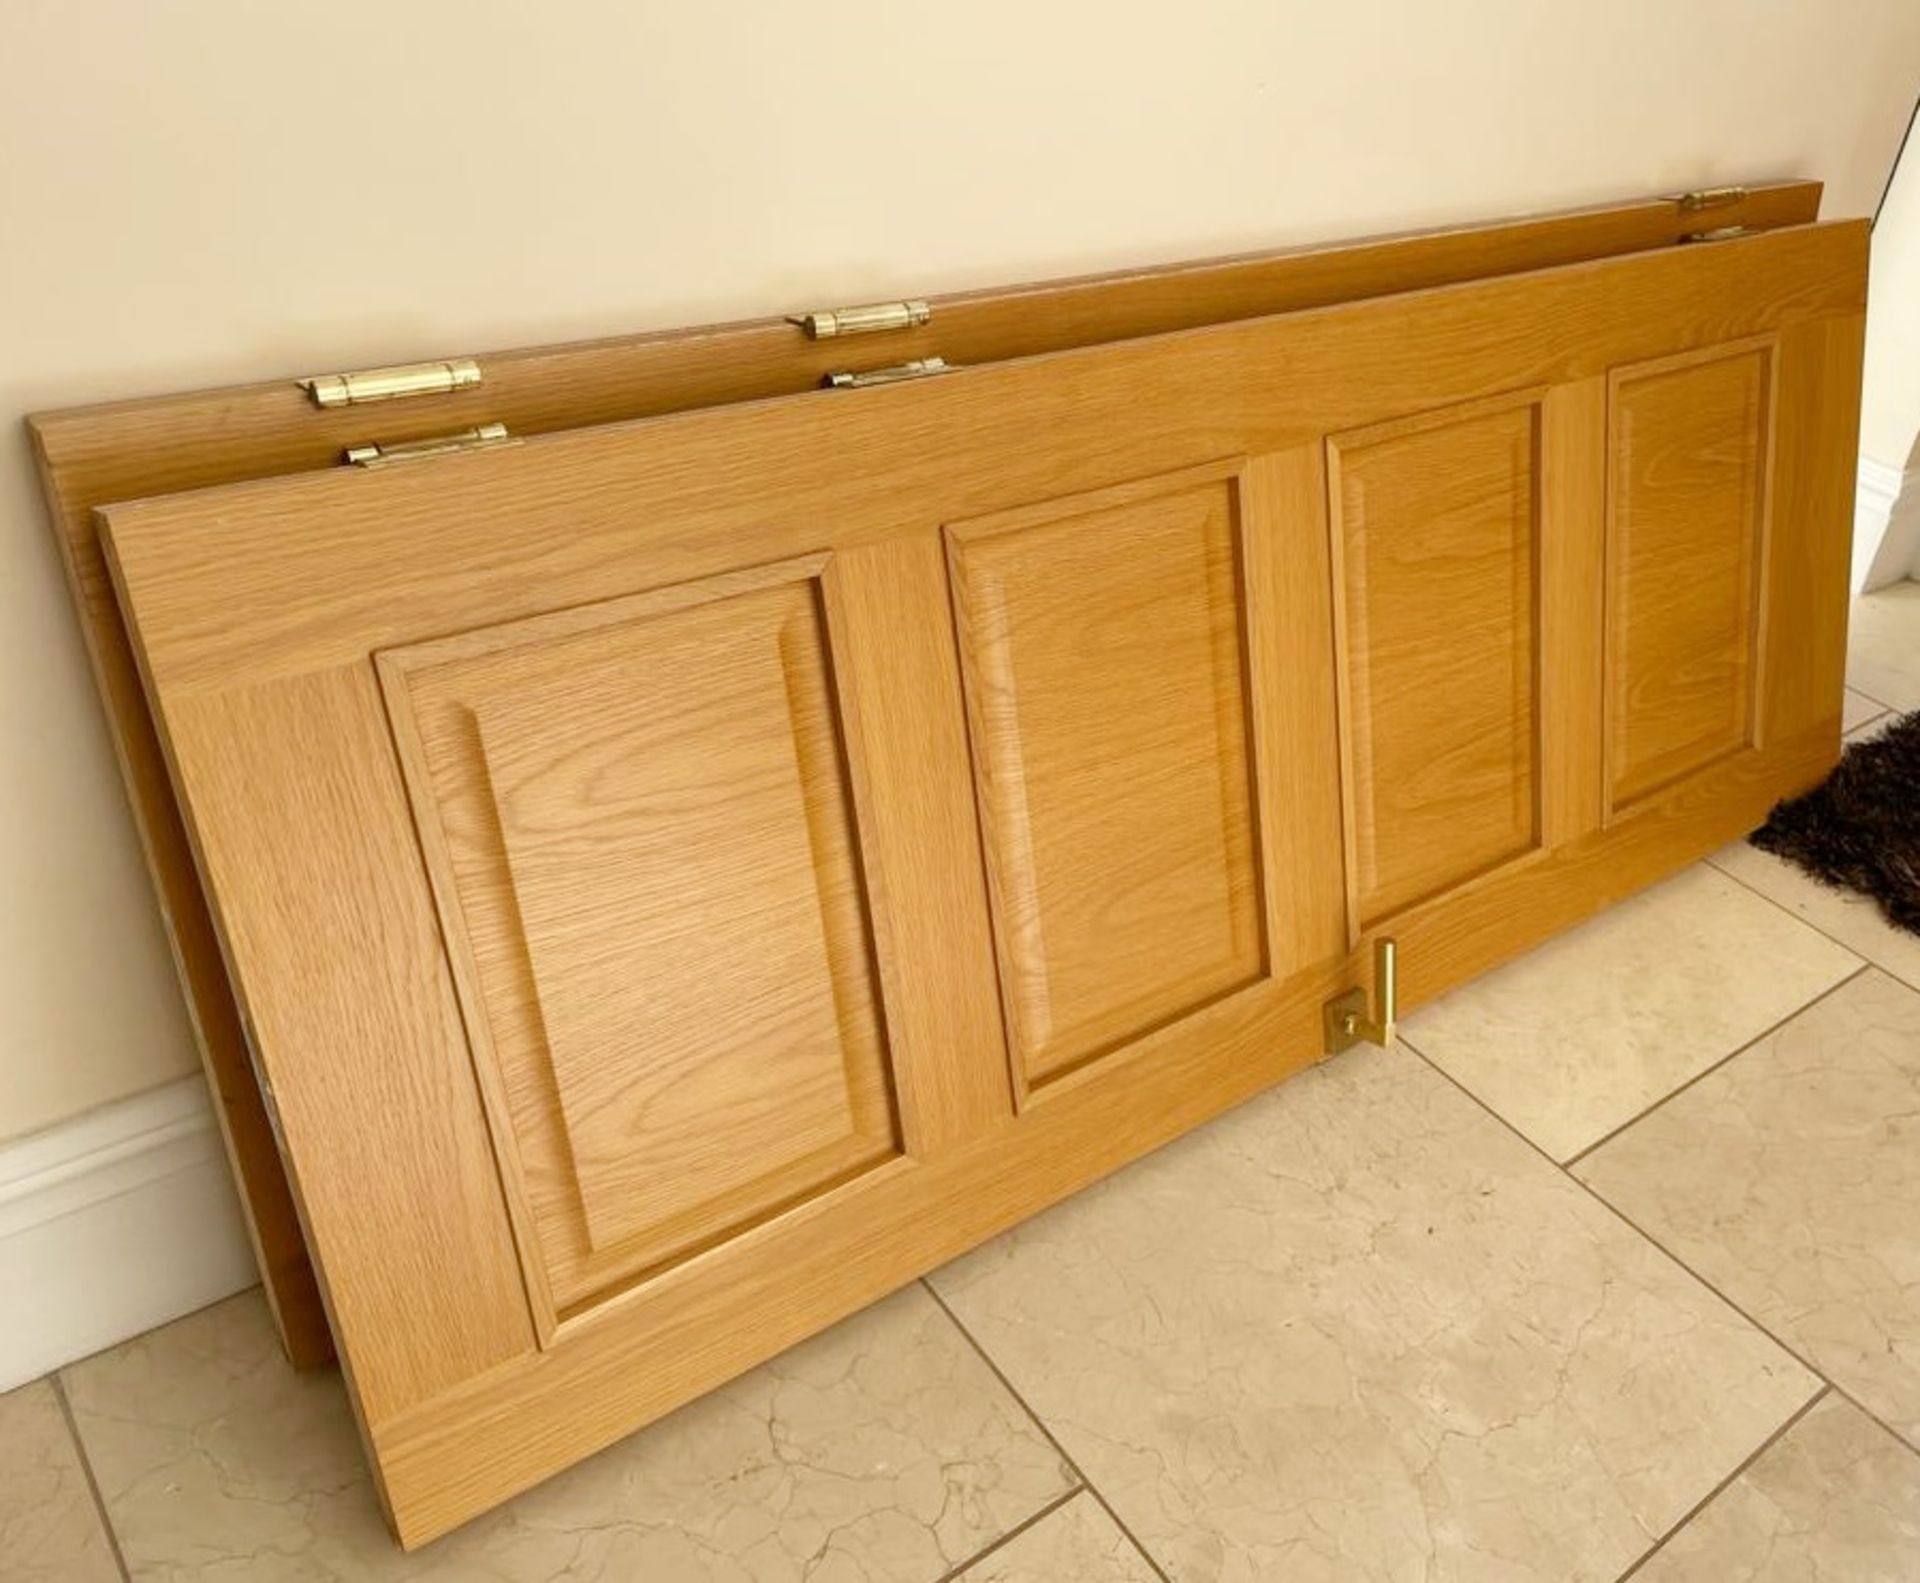 6 x Roble Solid Oak Internal Single Doors - 35mm Thickness - NO VAT ON THE HAMMER - Complete With